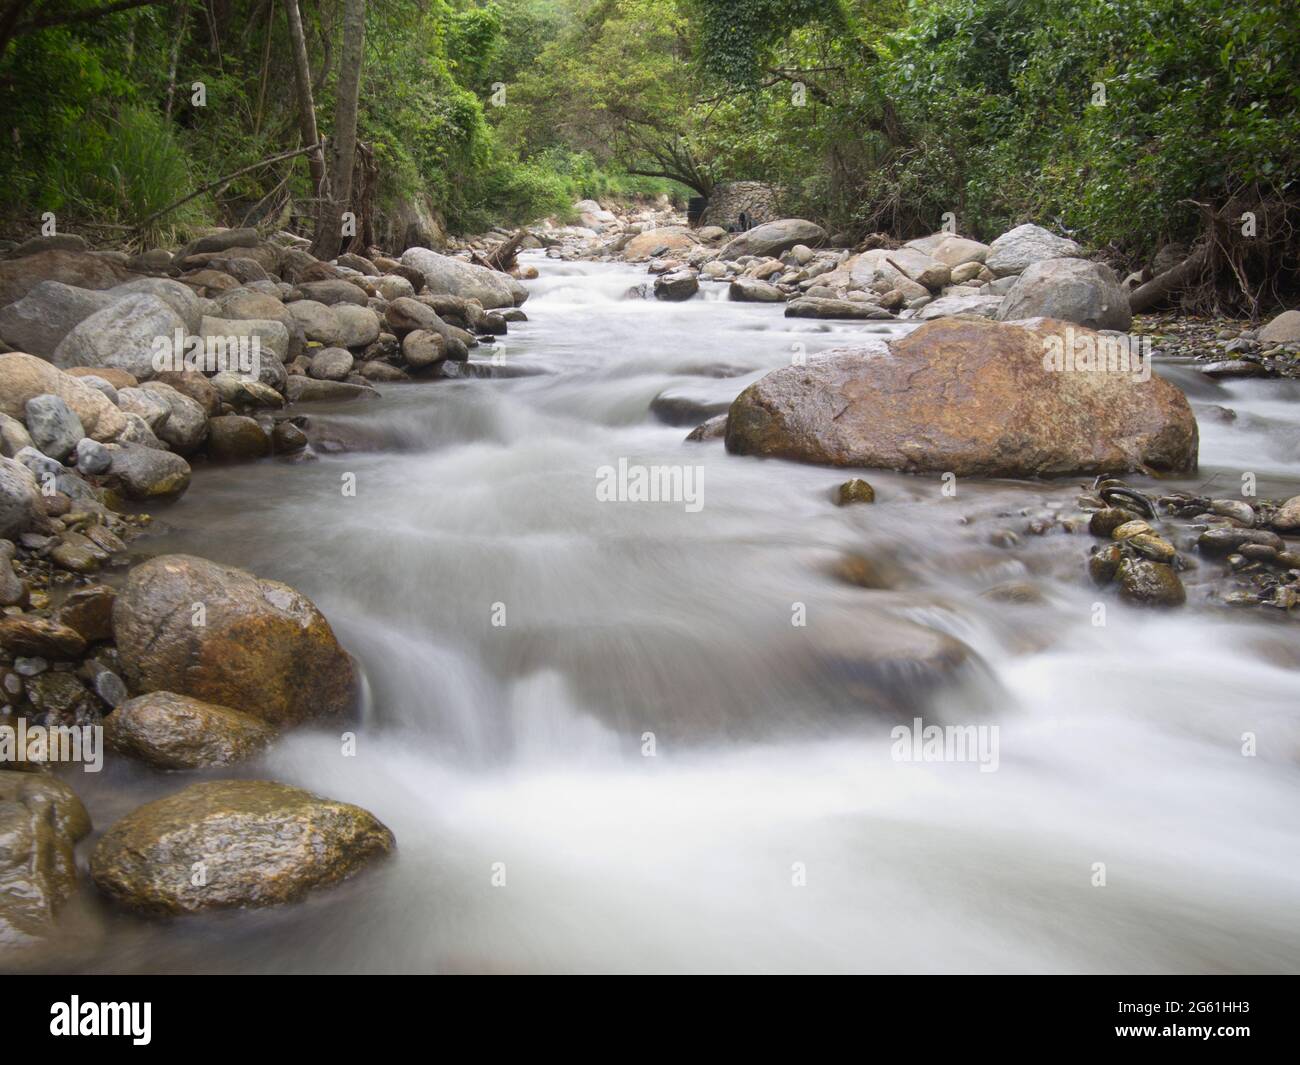 Slow motion timelapse of river and forest in Podocarpus National Park, Ecuador. Stock Photo